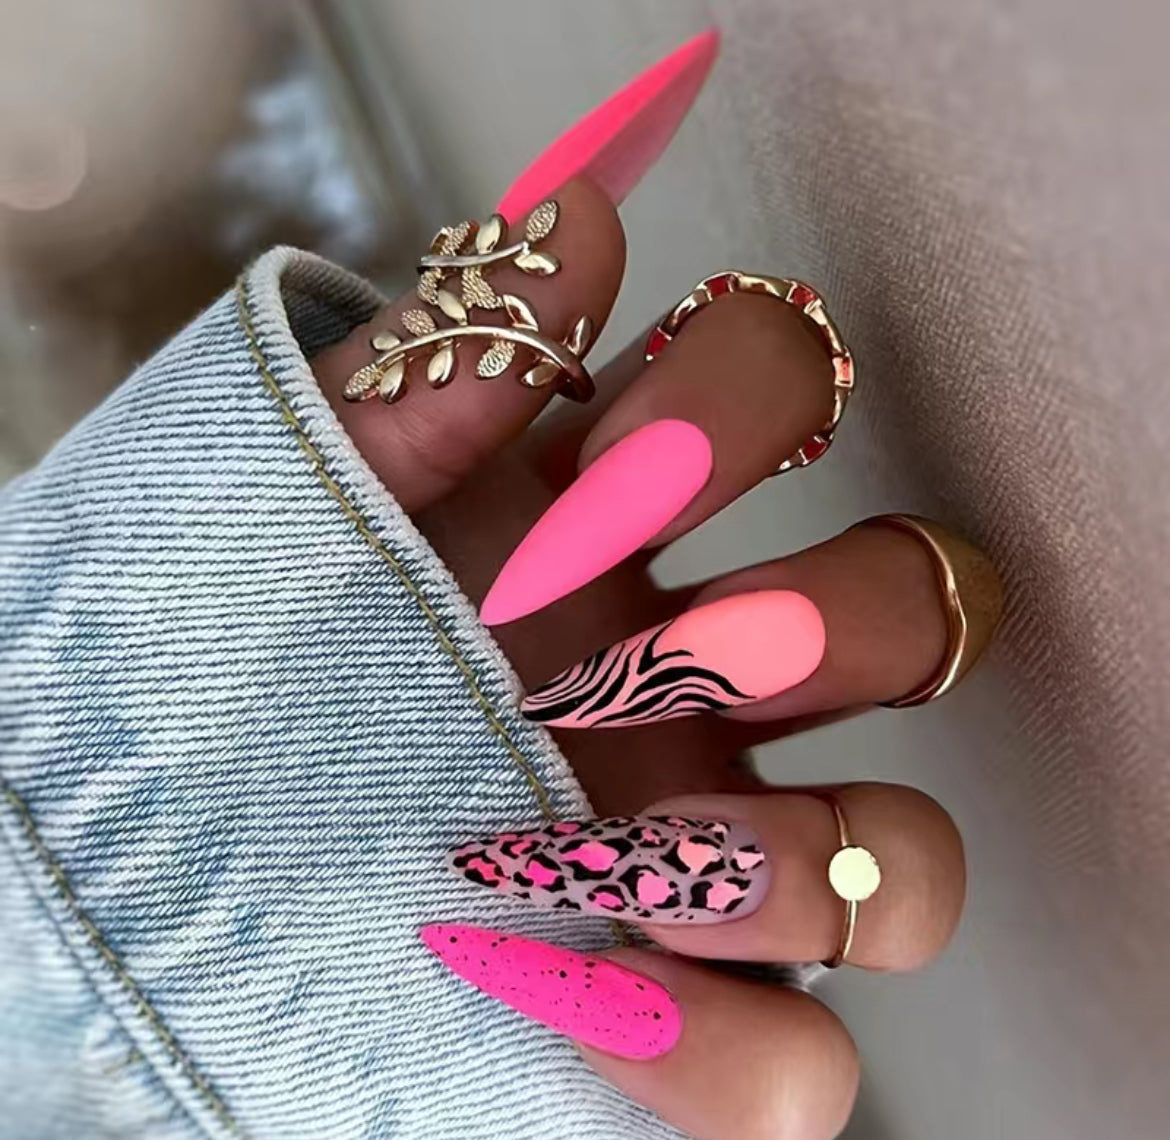 Matte Stiletto Press On Nails with Zebra Leopard Print Design - Full Cover Acrylic False Nails for Women and Girls - Hot Pink Color